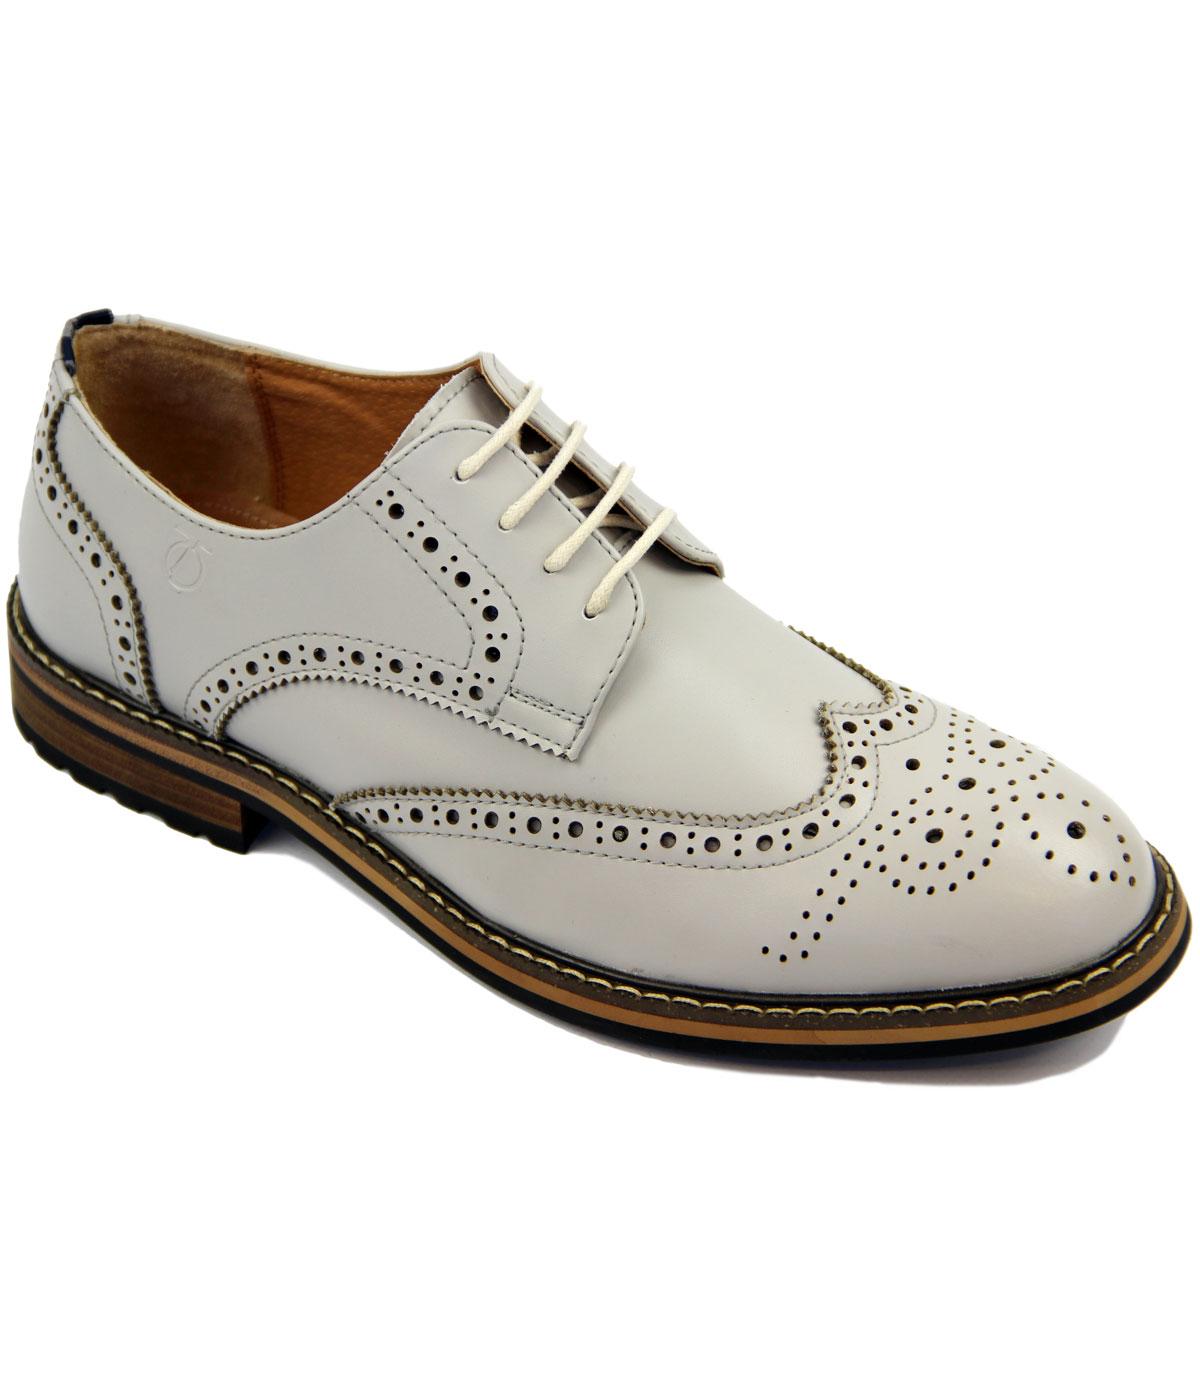 PETER WERTH Turnmill Retro 60s Mod Derby Brogue Shoes in Grey